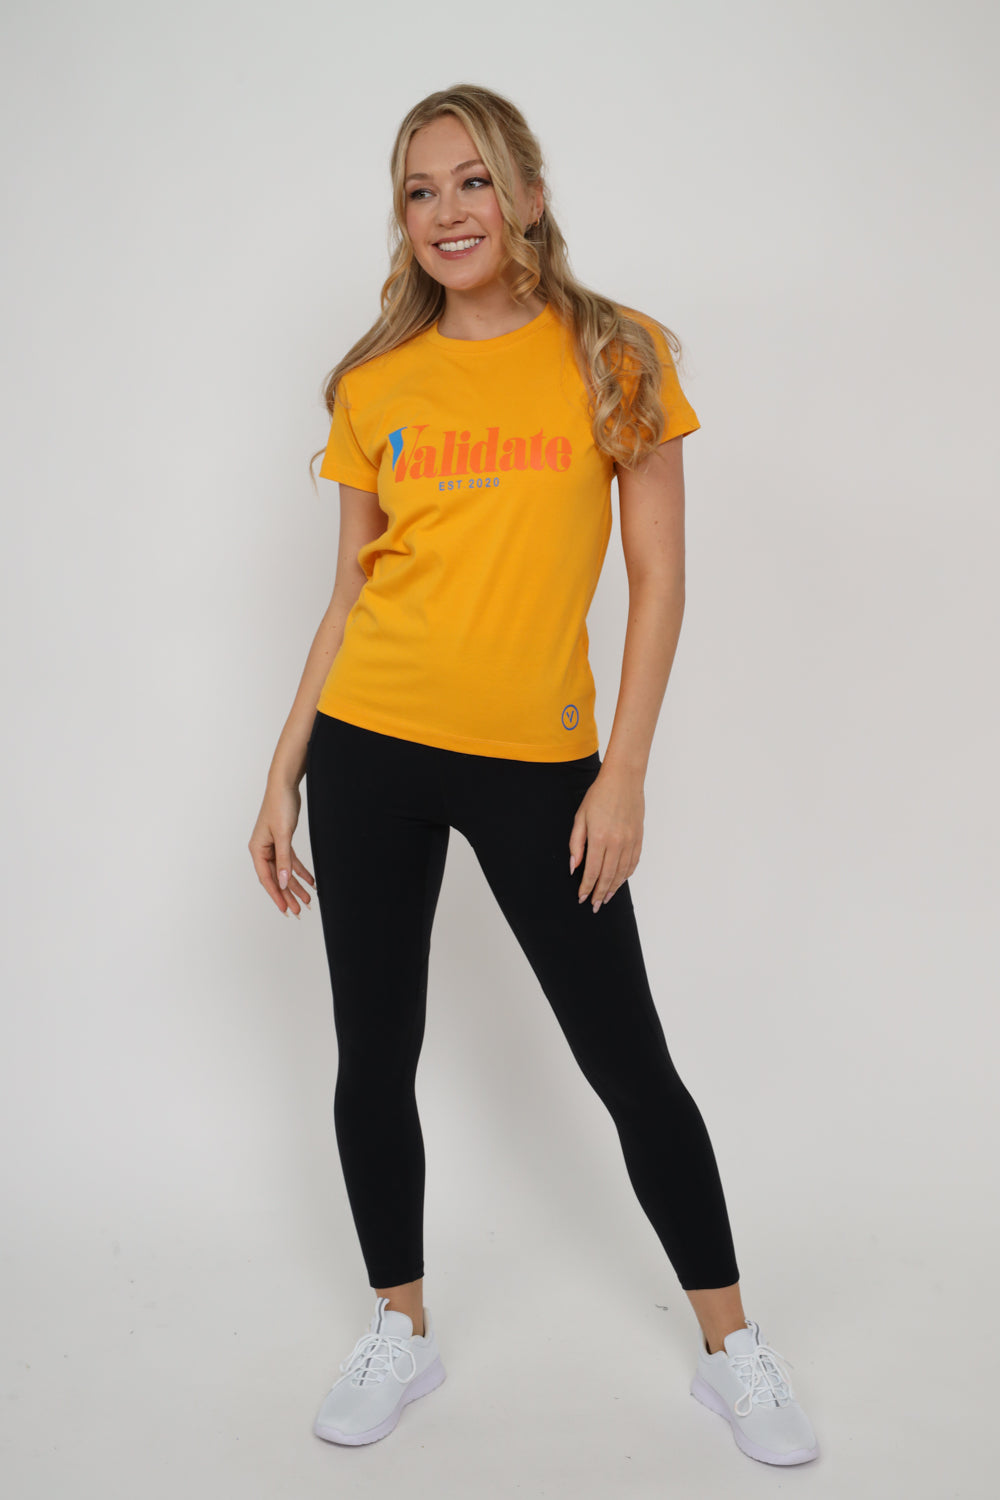 Validate Summer Yellow T-Shirt | Validate Fashion Women's T-Shrits and Vests | Hertfordshire